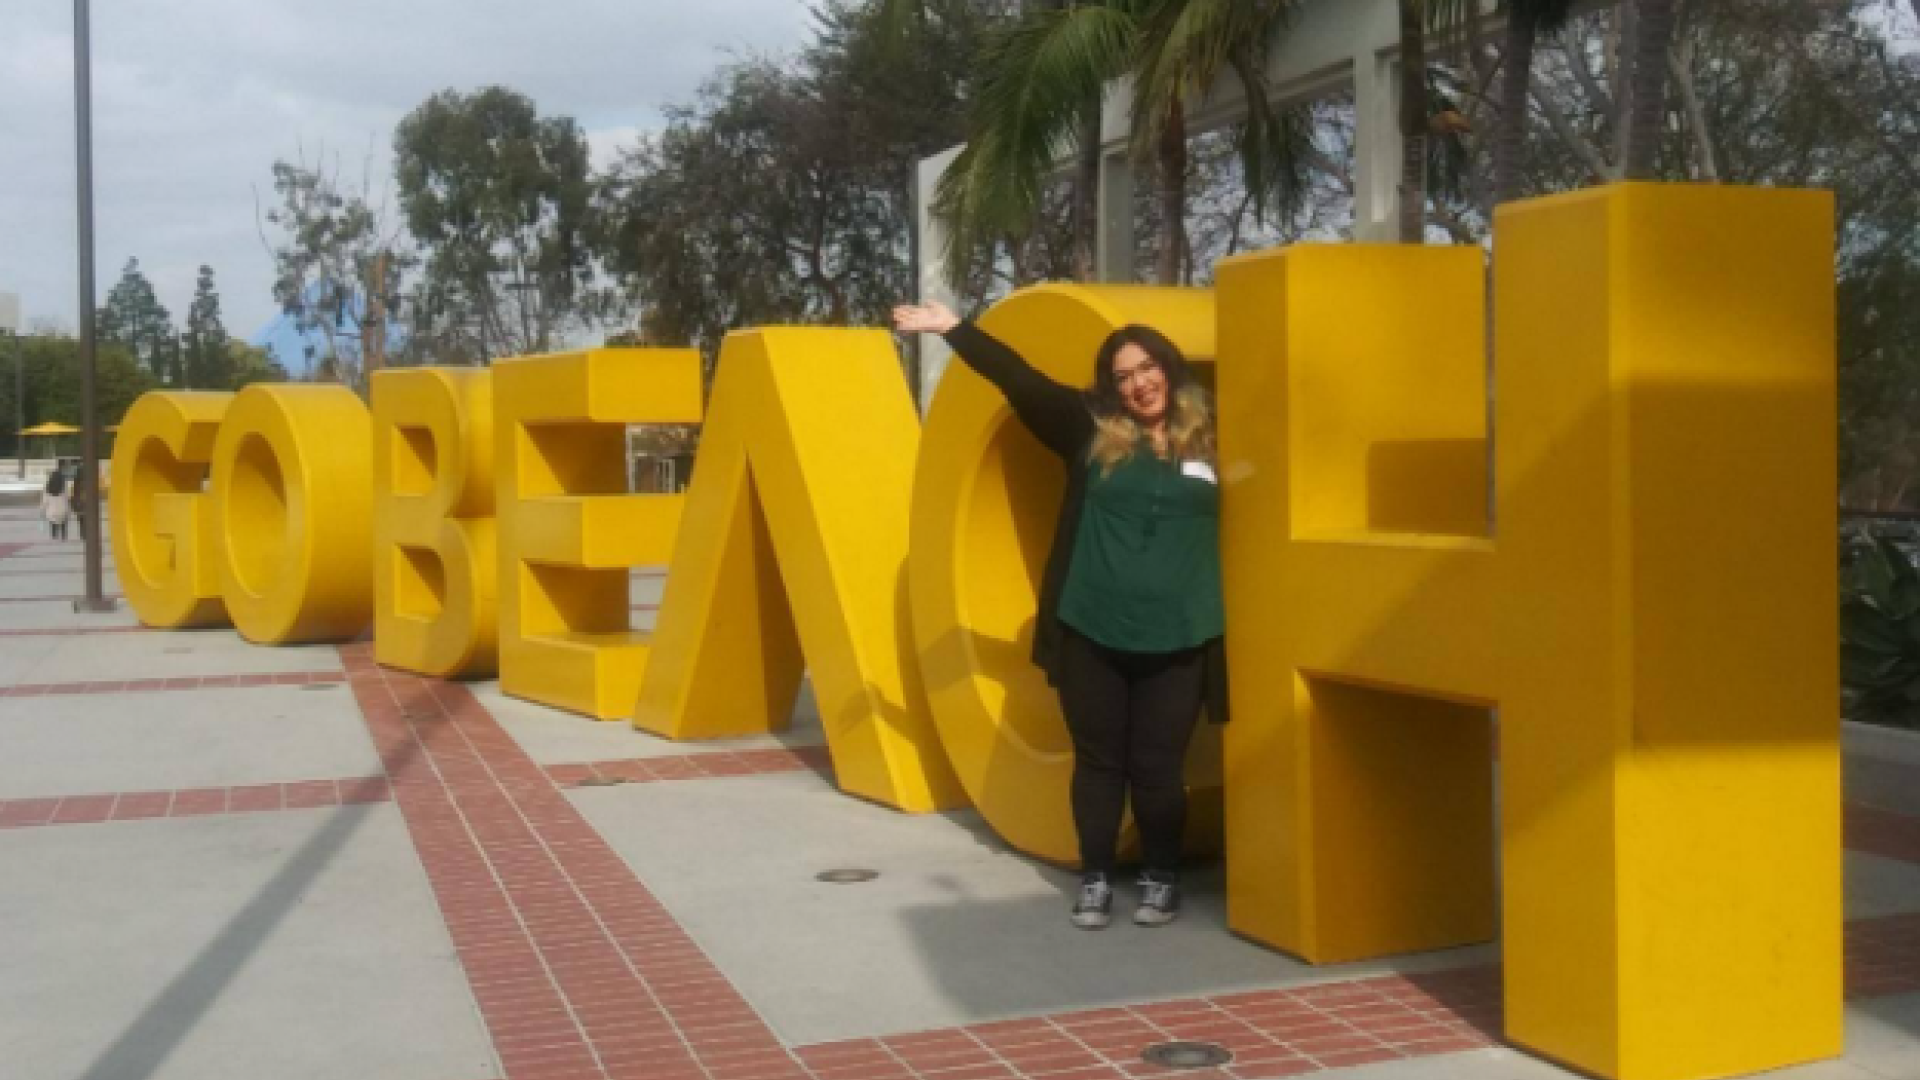 CSULB Transfer Student Orientation Day in January  2020